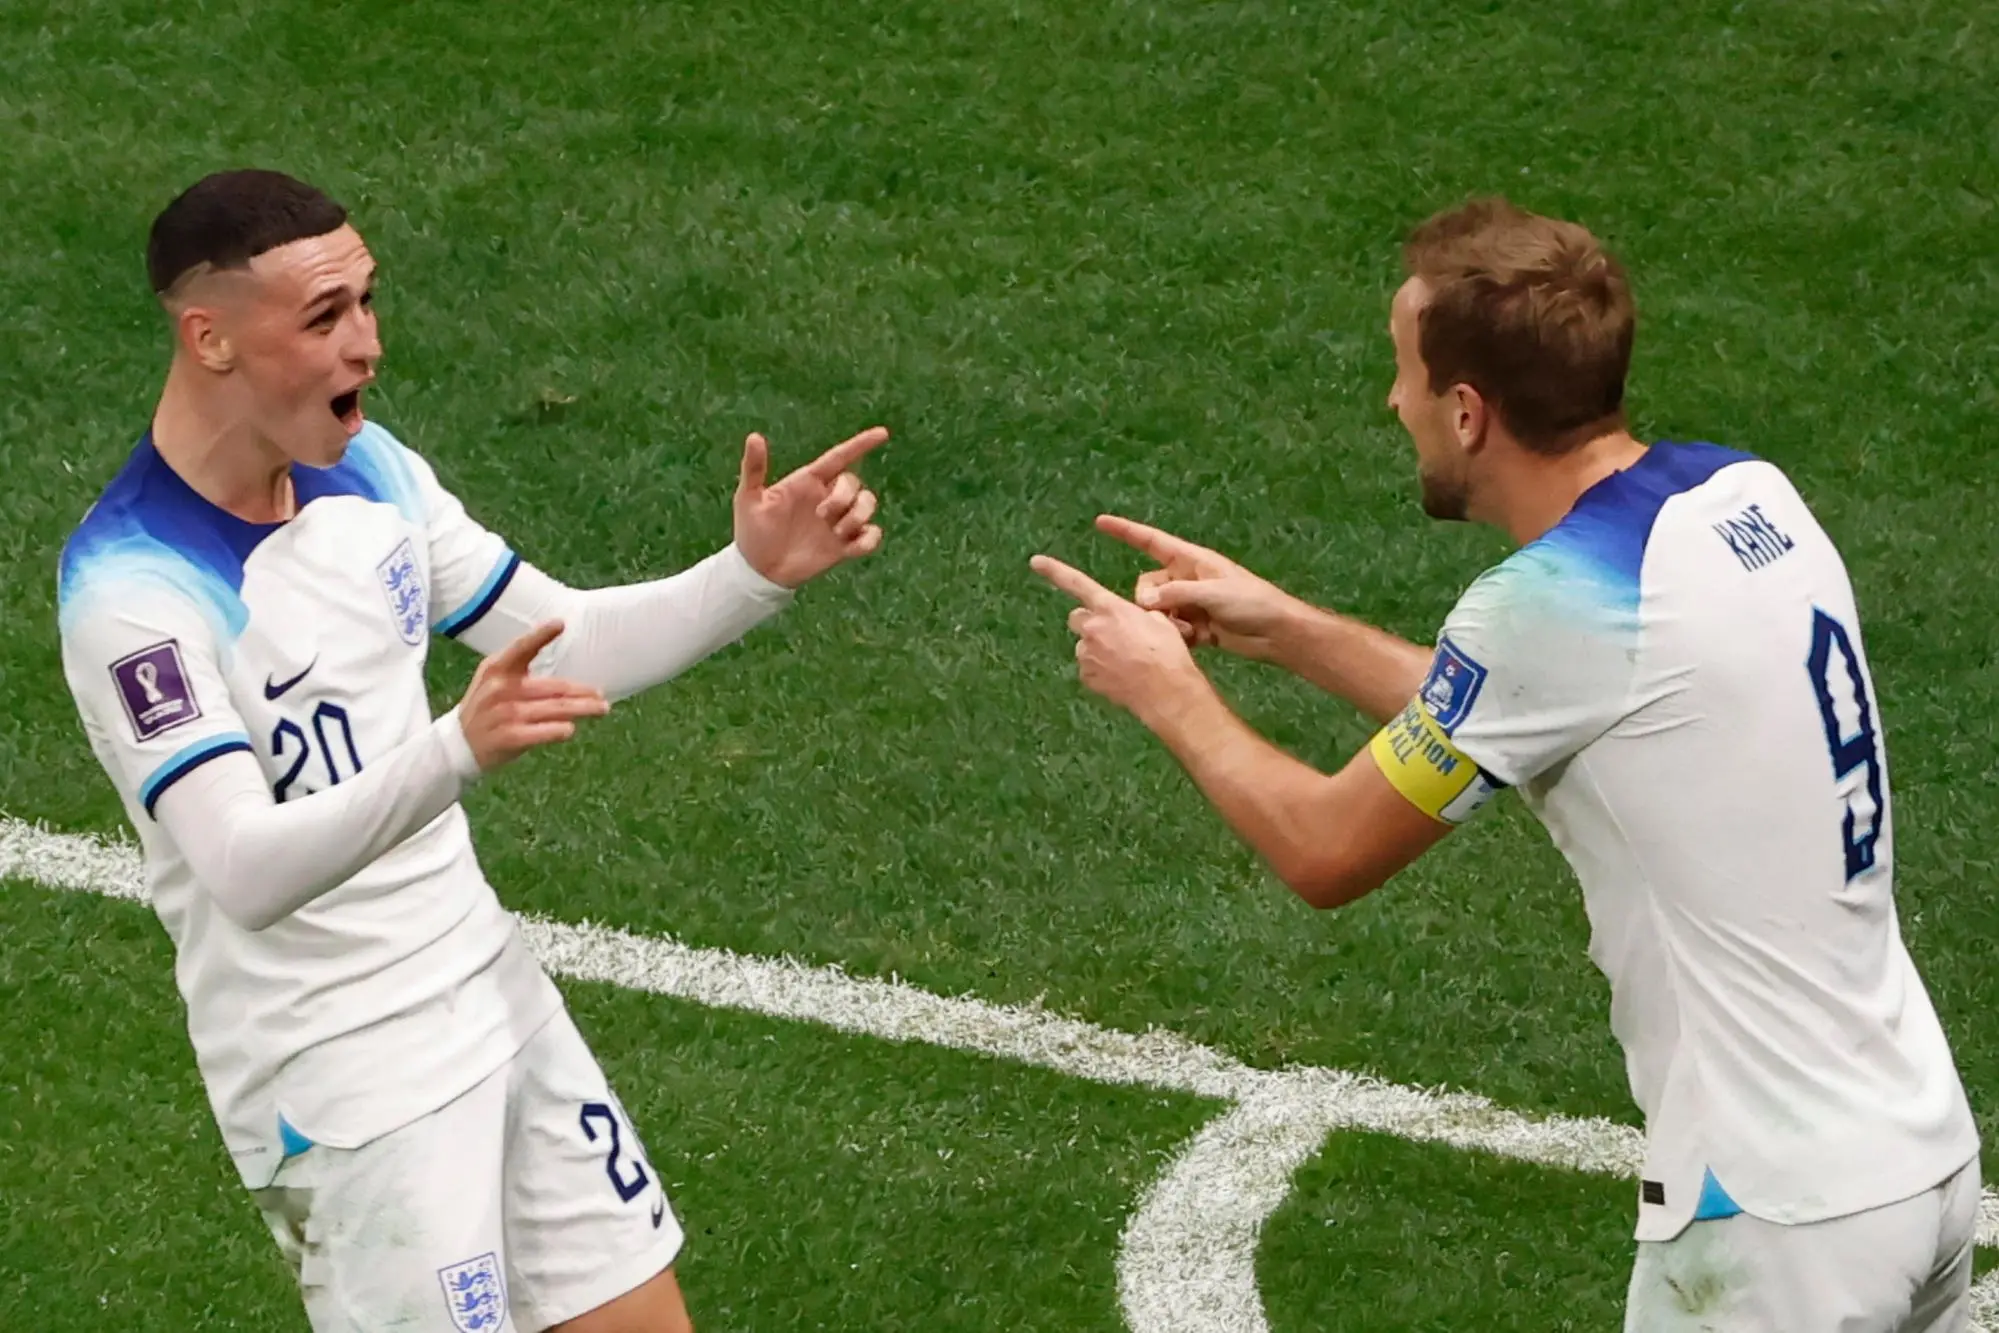 epa10348670 Harry Kane of England celebrates scoring the 2-0 goal with his teammate Phil Foden during the FIFA World Cup 2022 round of 16 soccer match between England and Senegal at Al Bayt Stadium in Al Khor, Qatar, 04 December 2022. EPA/Rolex dela Pena